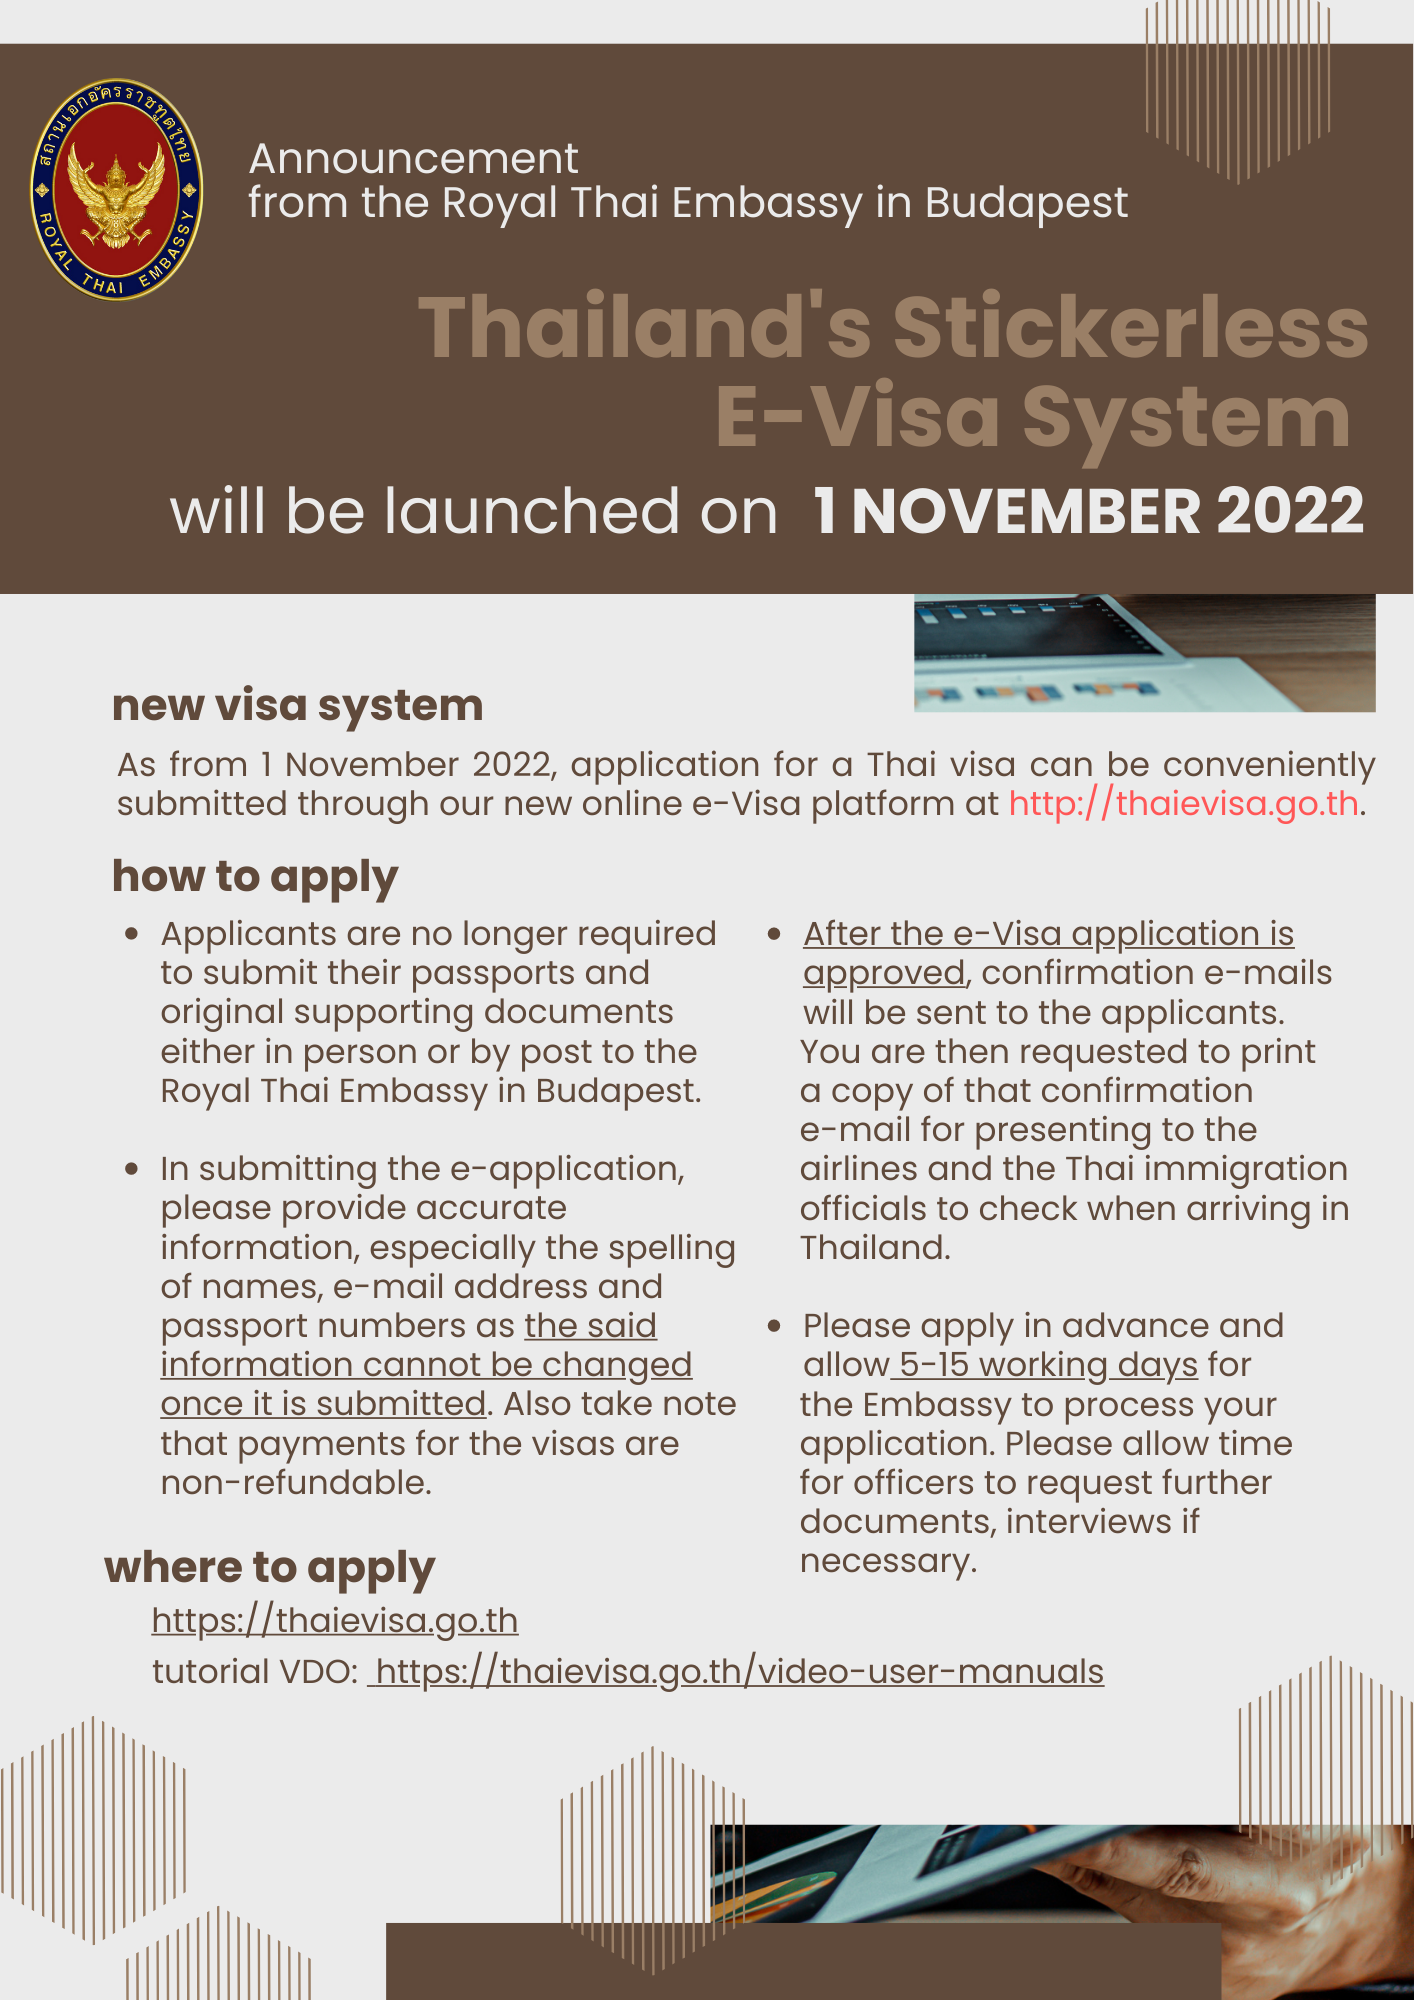 Announcement_from_the_Royal_Thai_Embassy_in_Budapest_(1)_1